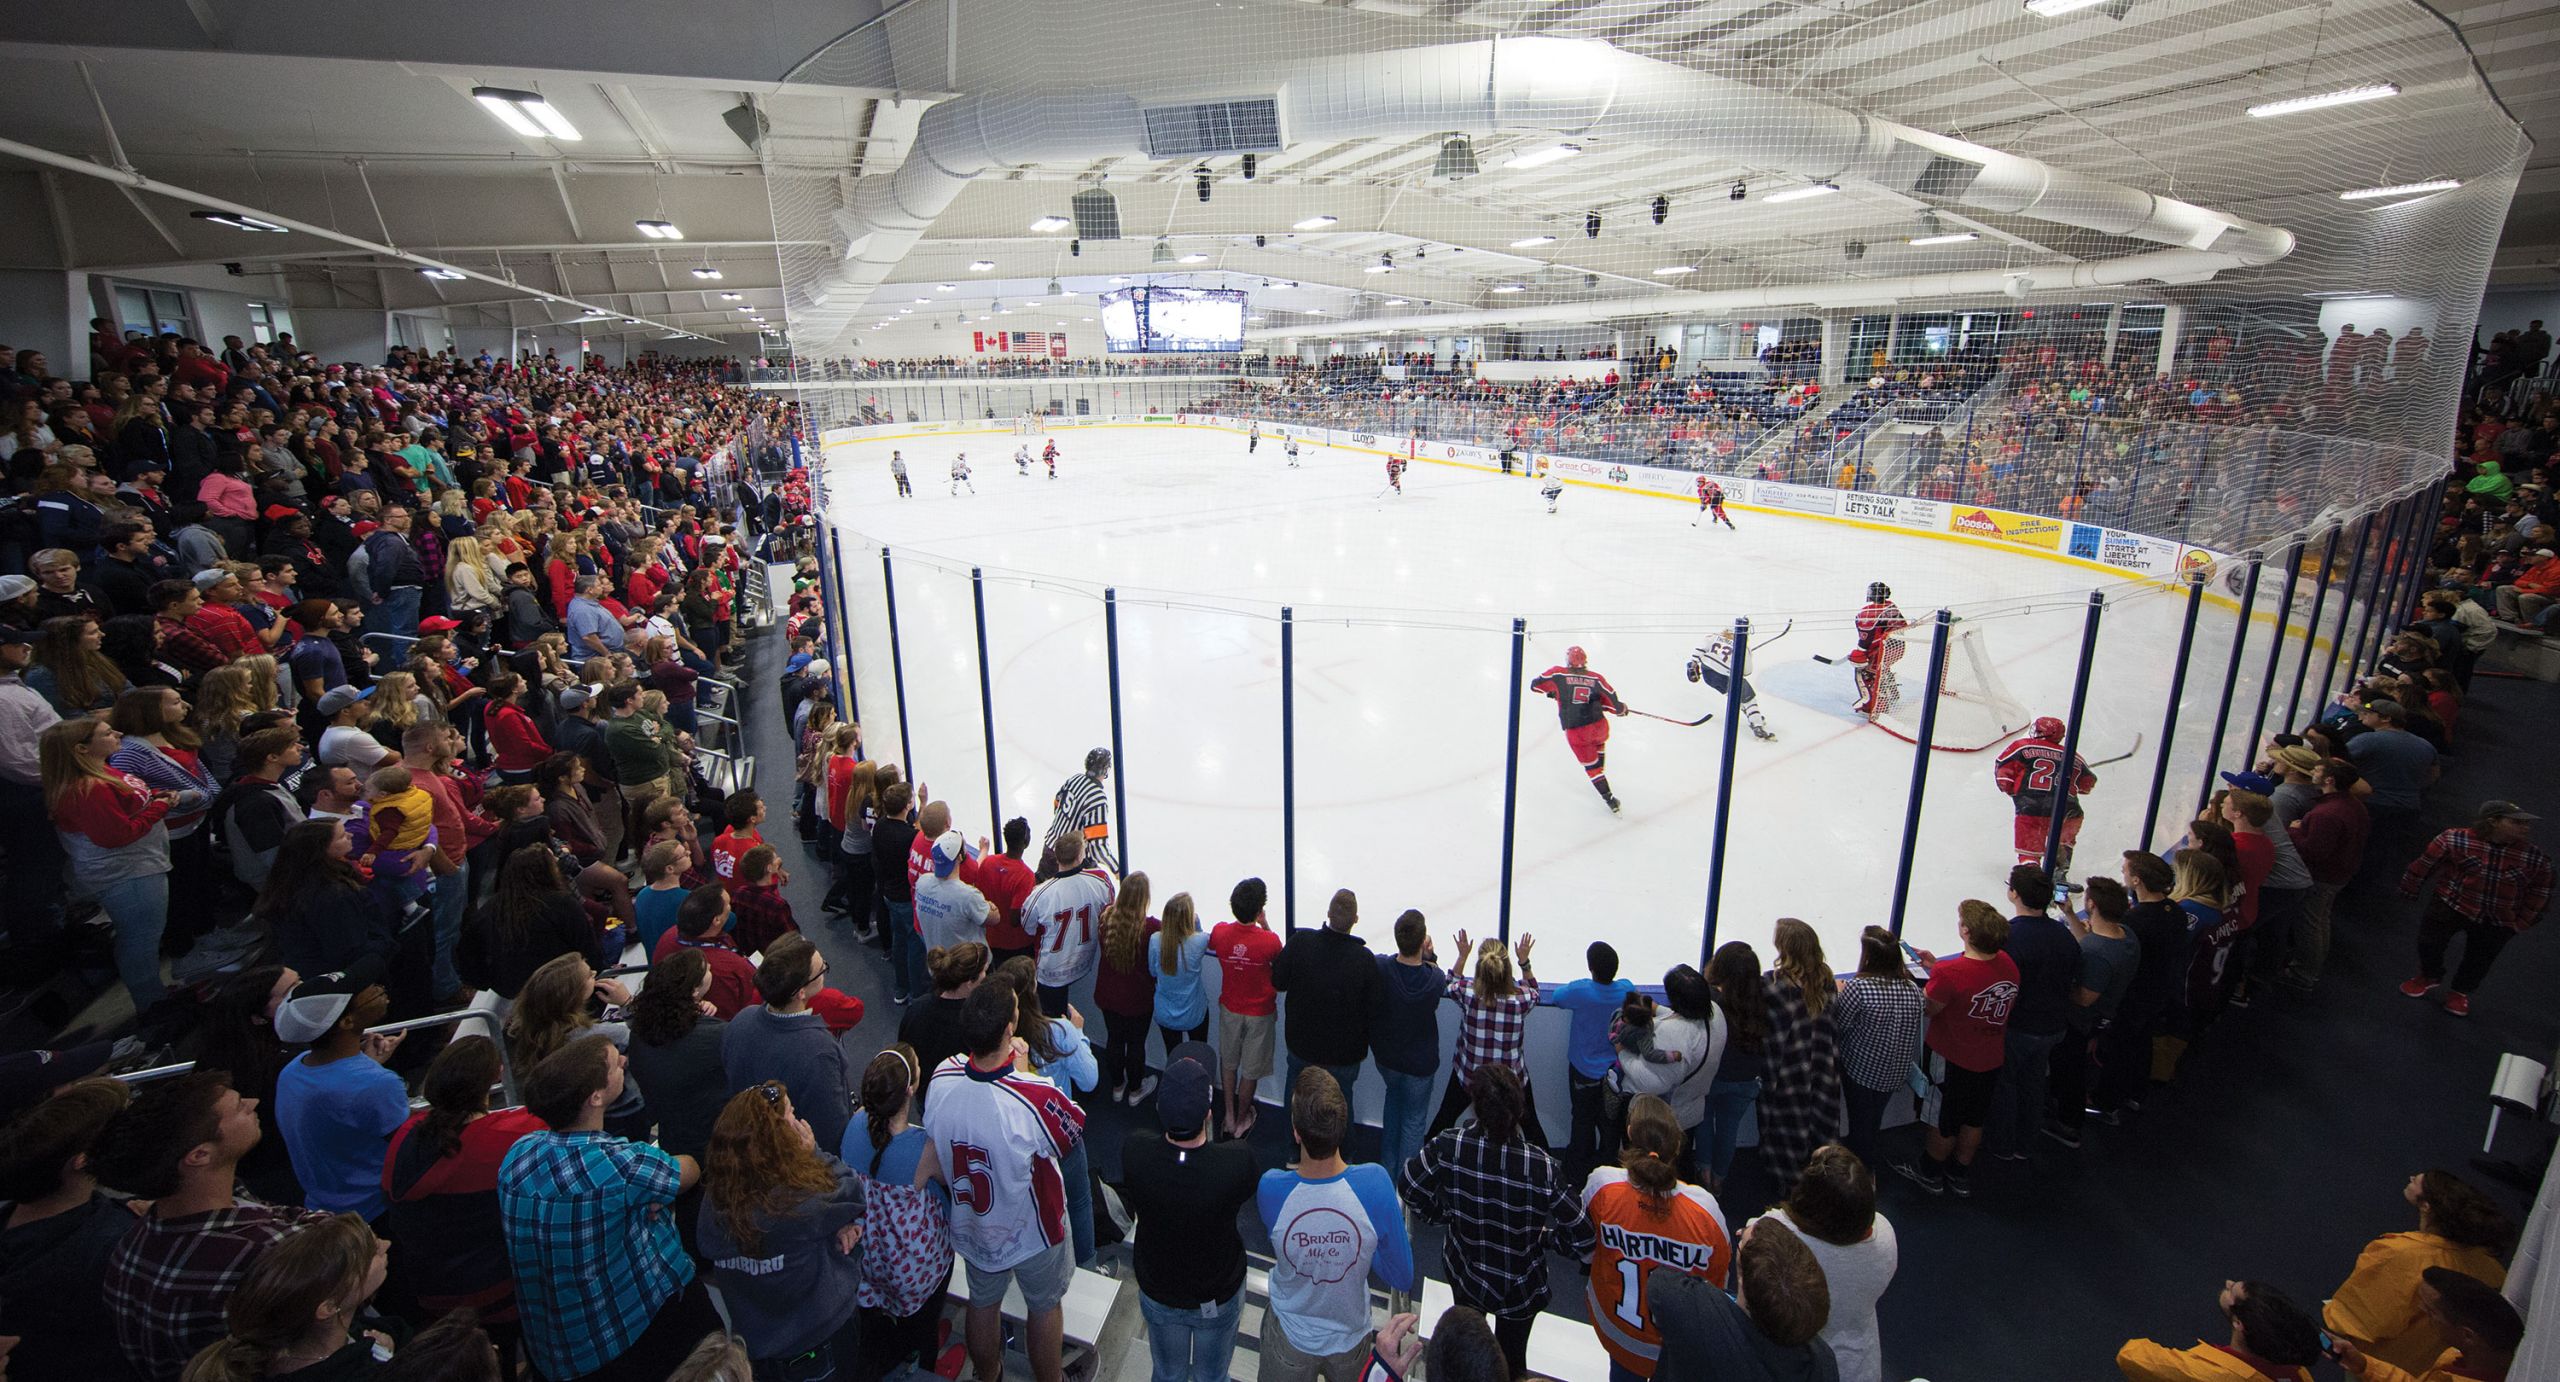 Liberty University's ACHA DI men's hockey team takes the ice in front of a record crowd during the grand re-opening of the expanded and renovated LaHaye Ice Center.